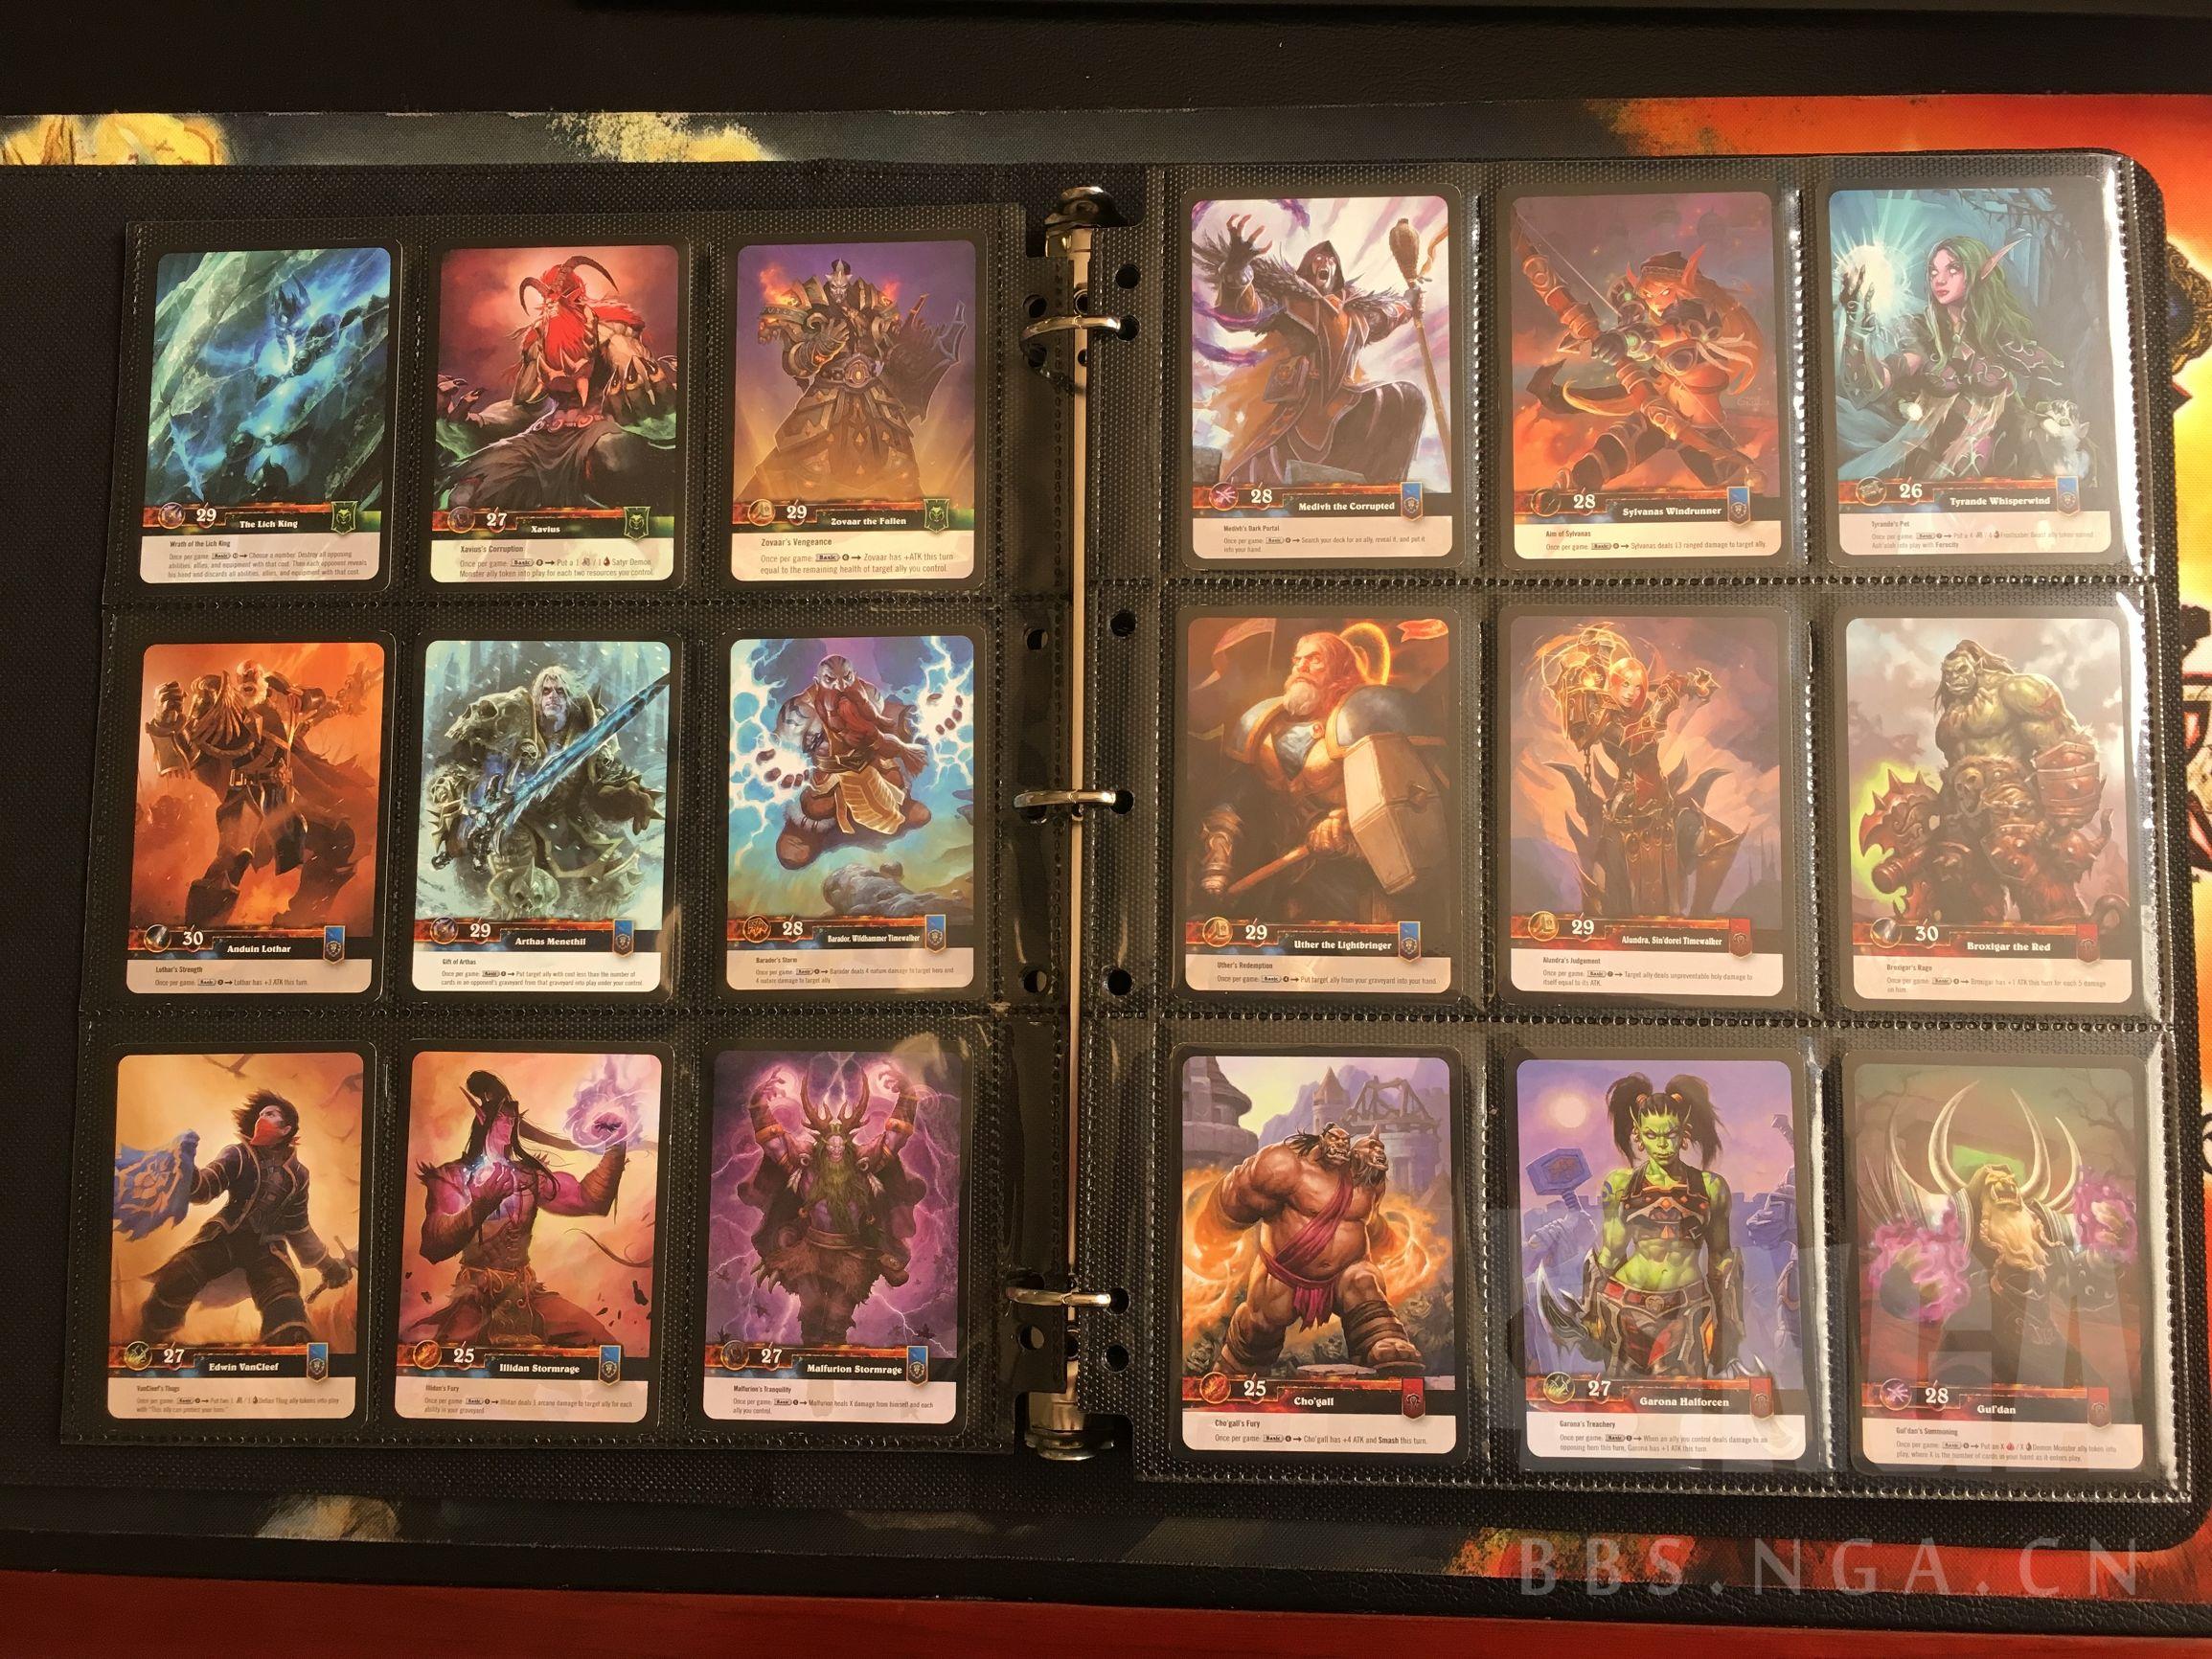 Warcraft card WOWTCG collection guide, a game that disappeared in 13 years!